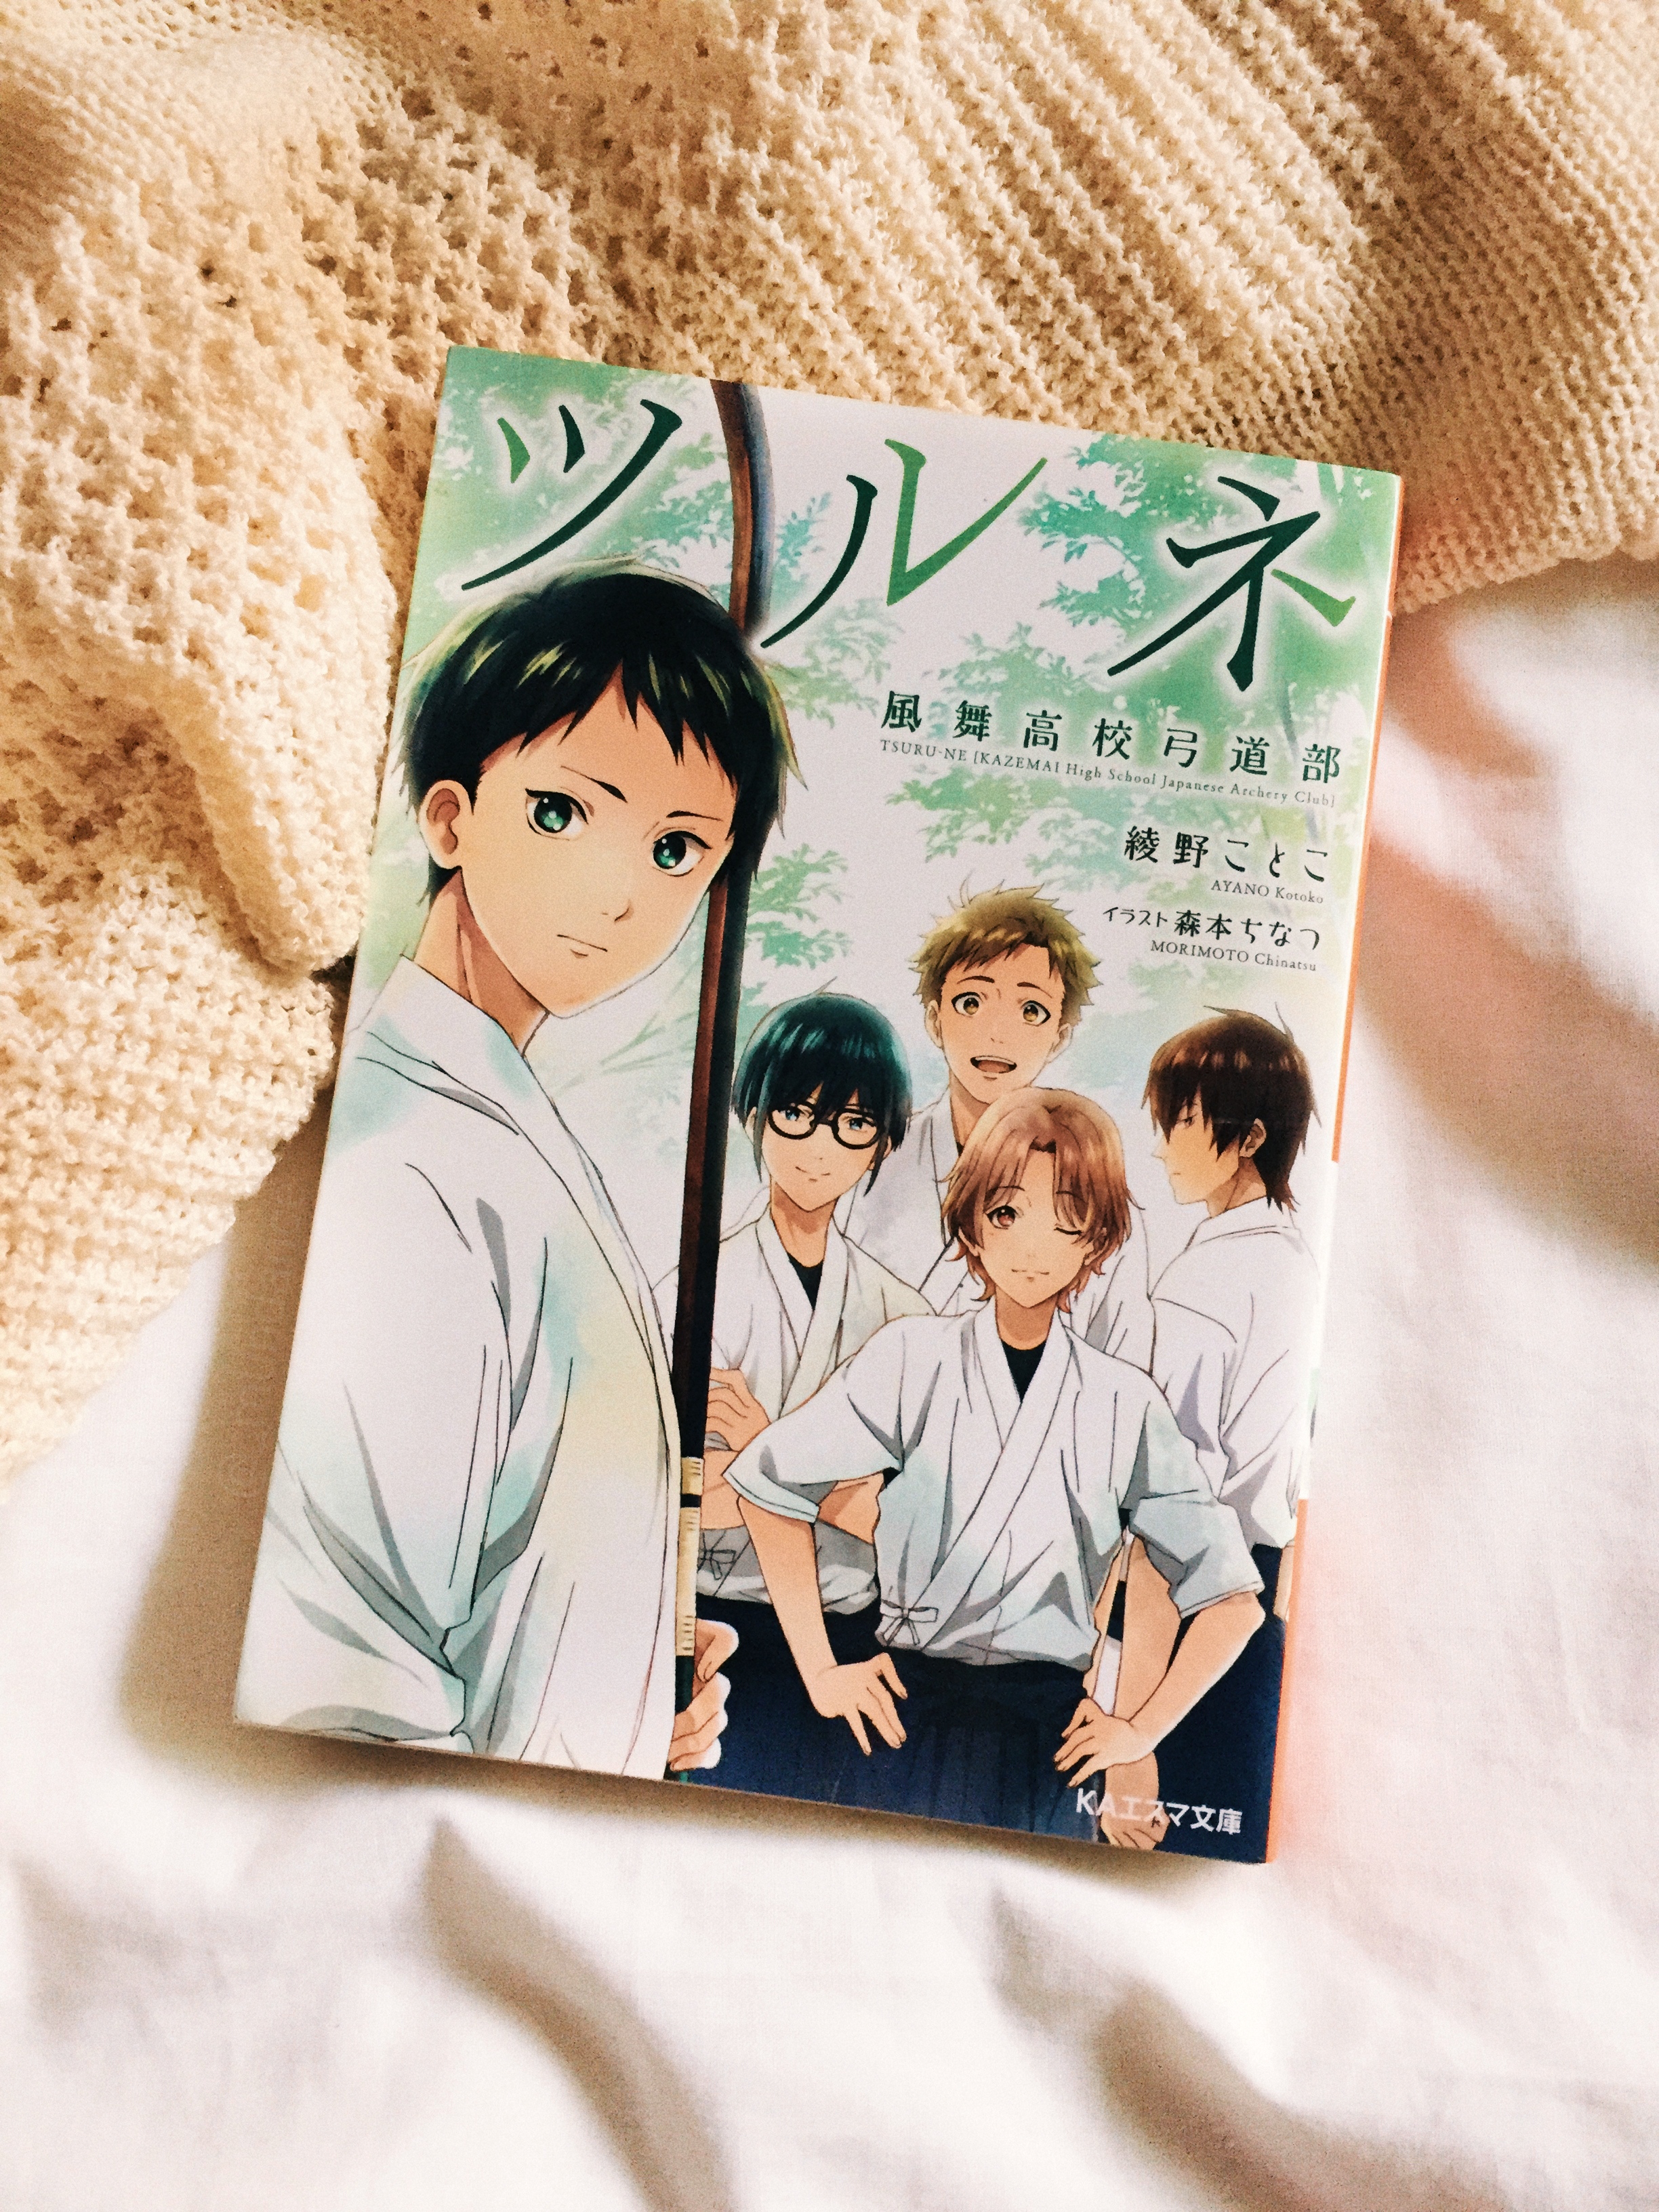 jess 🍃 tsurune s2  ia on X: The way of the bow was steep, which was why  it was so enjoyable and interesting. - Kotoko Ayano, Tsurune happy 5th  year anniversary